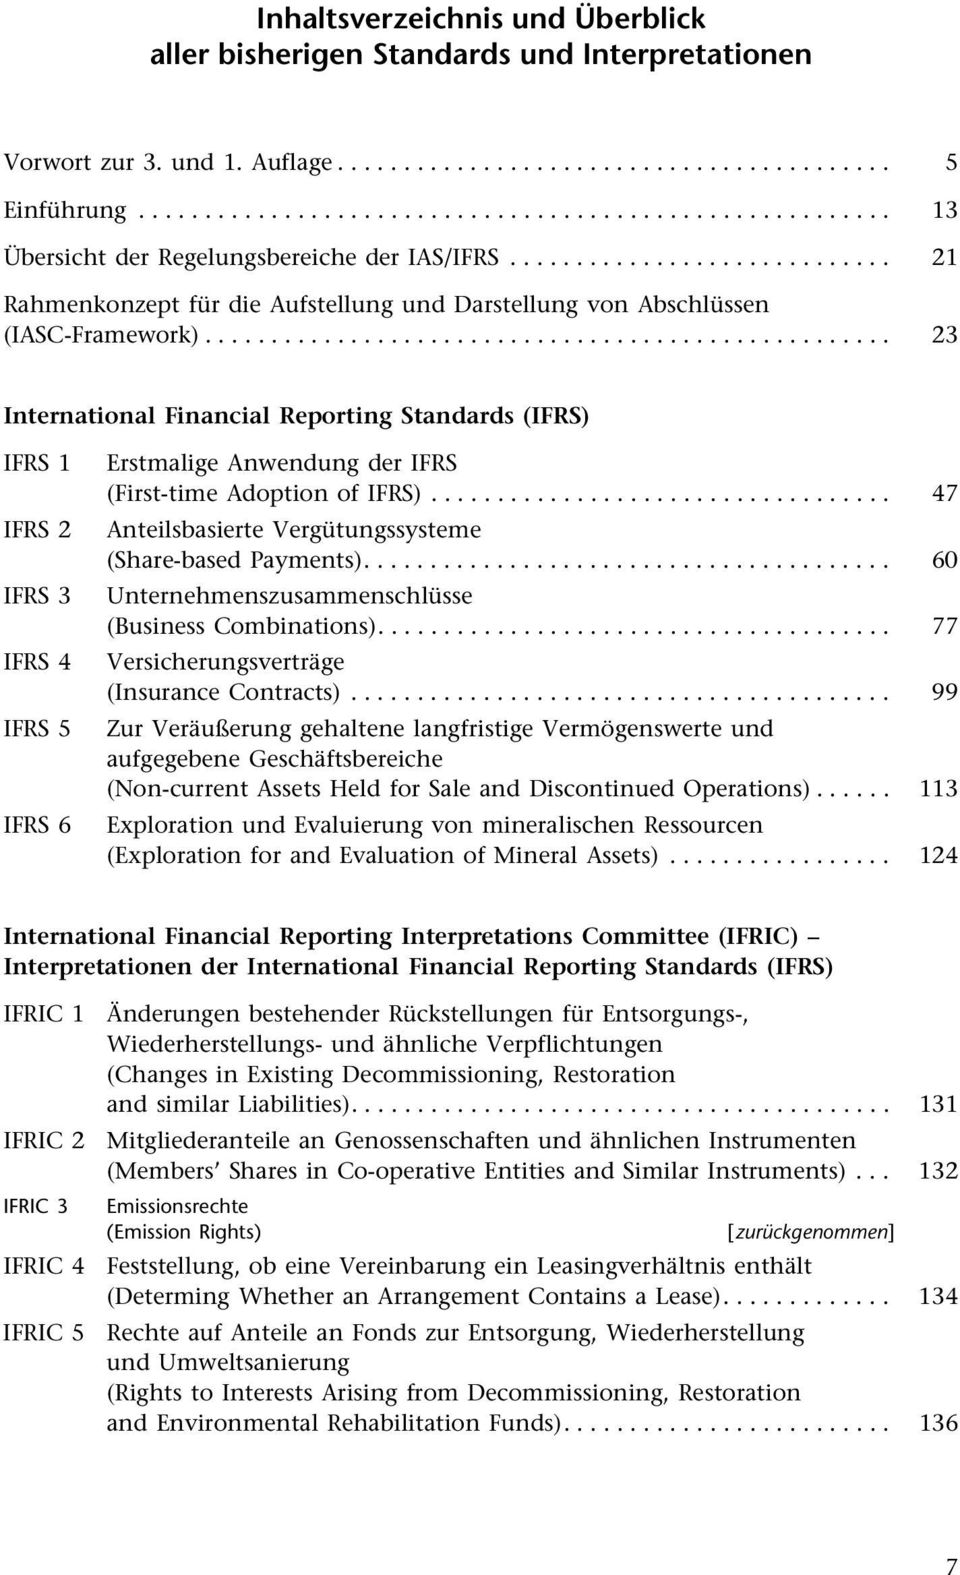 ................................................... 23 International Financial Reporting Standards (IFRS) IFRS 1 IFRS 2 IFRS 3 IFRS 4 IFRS 5 IFRS 6 Erstmalige Anwendung der IFRS (First-time Adoption of IFRS).